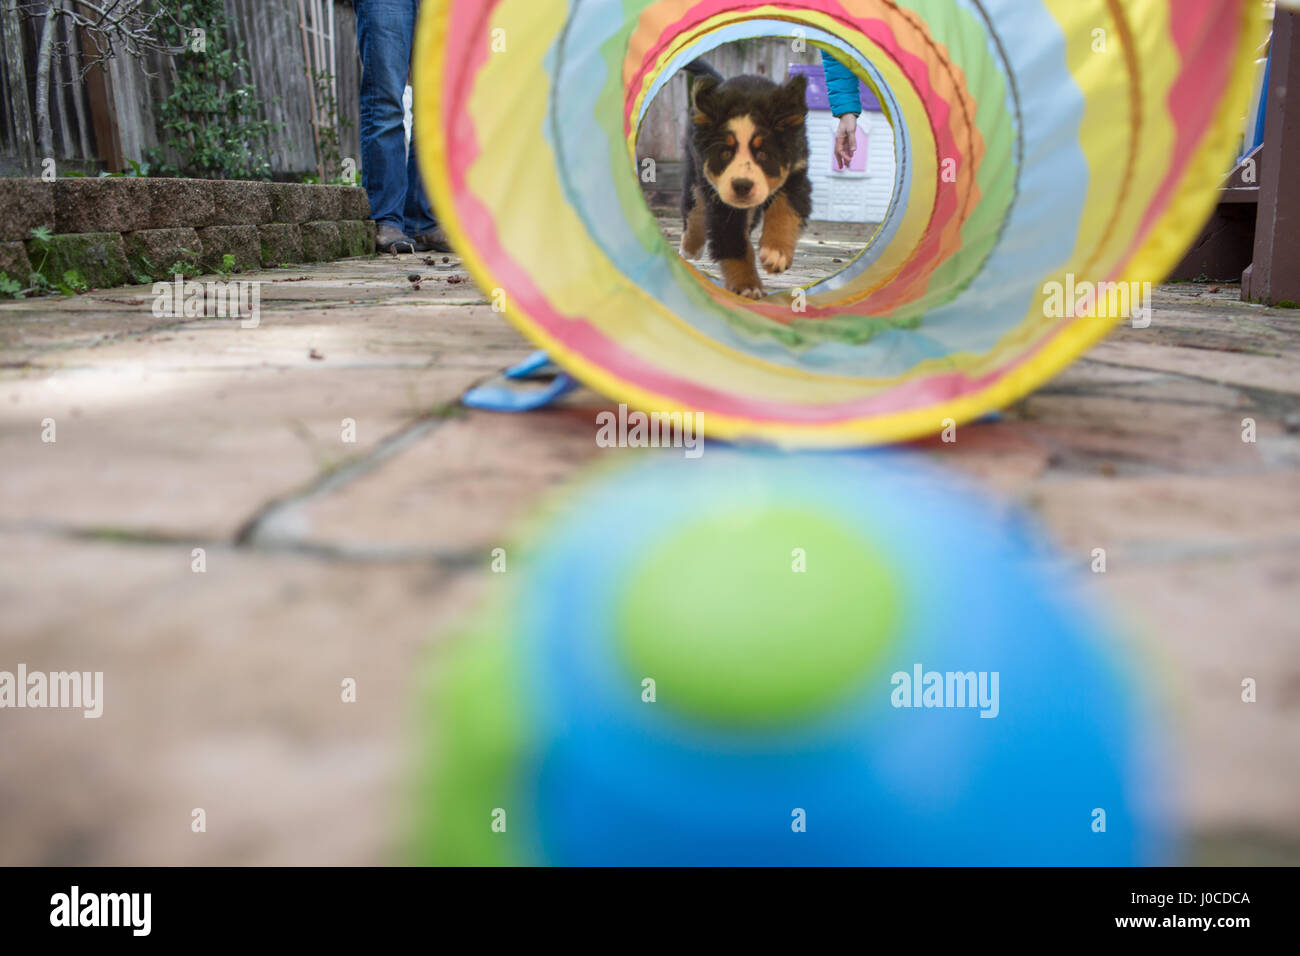 Young dog walking through child's play tunnel Stock Photo